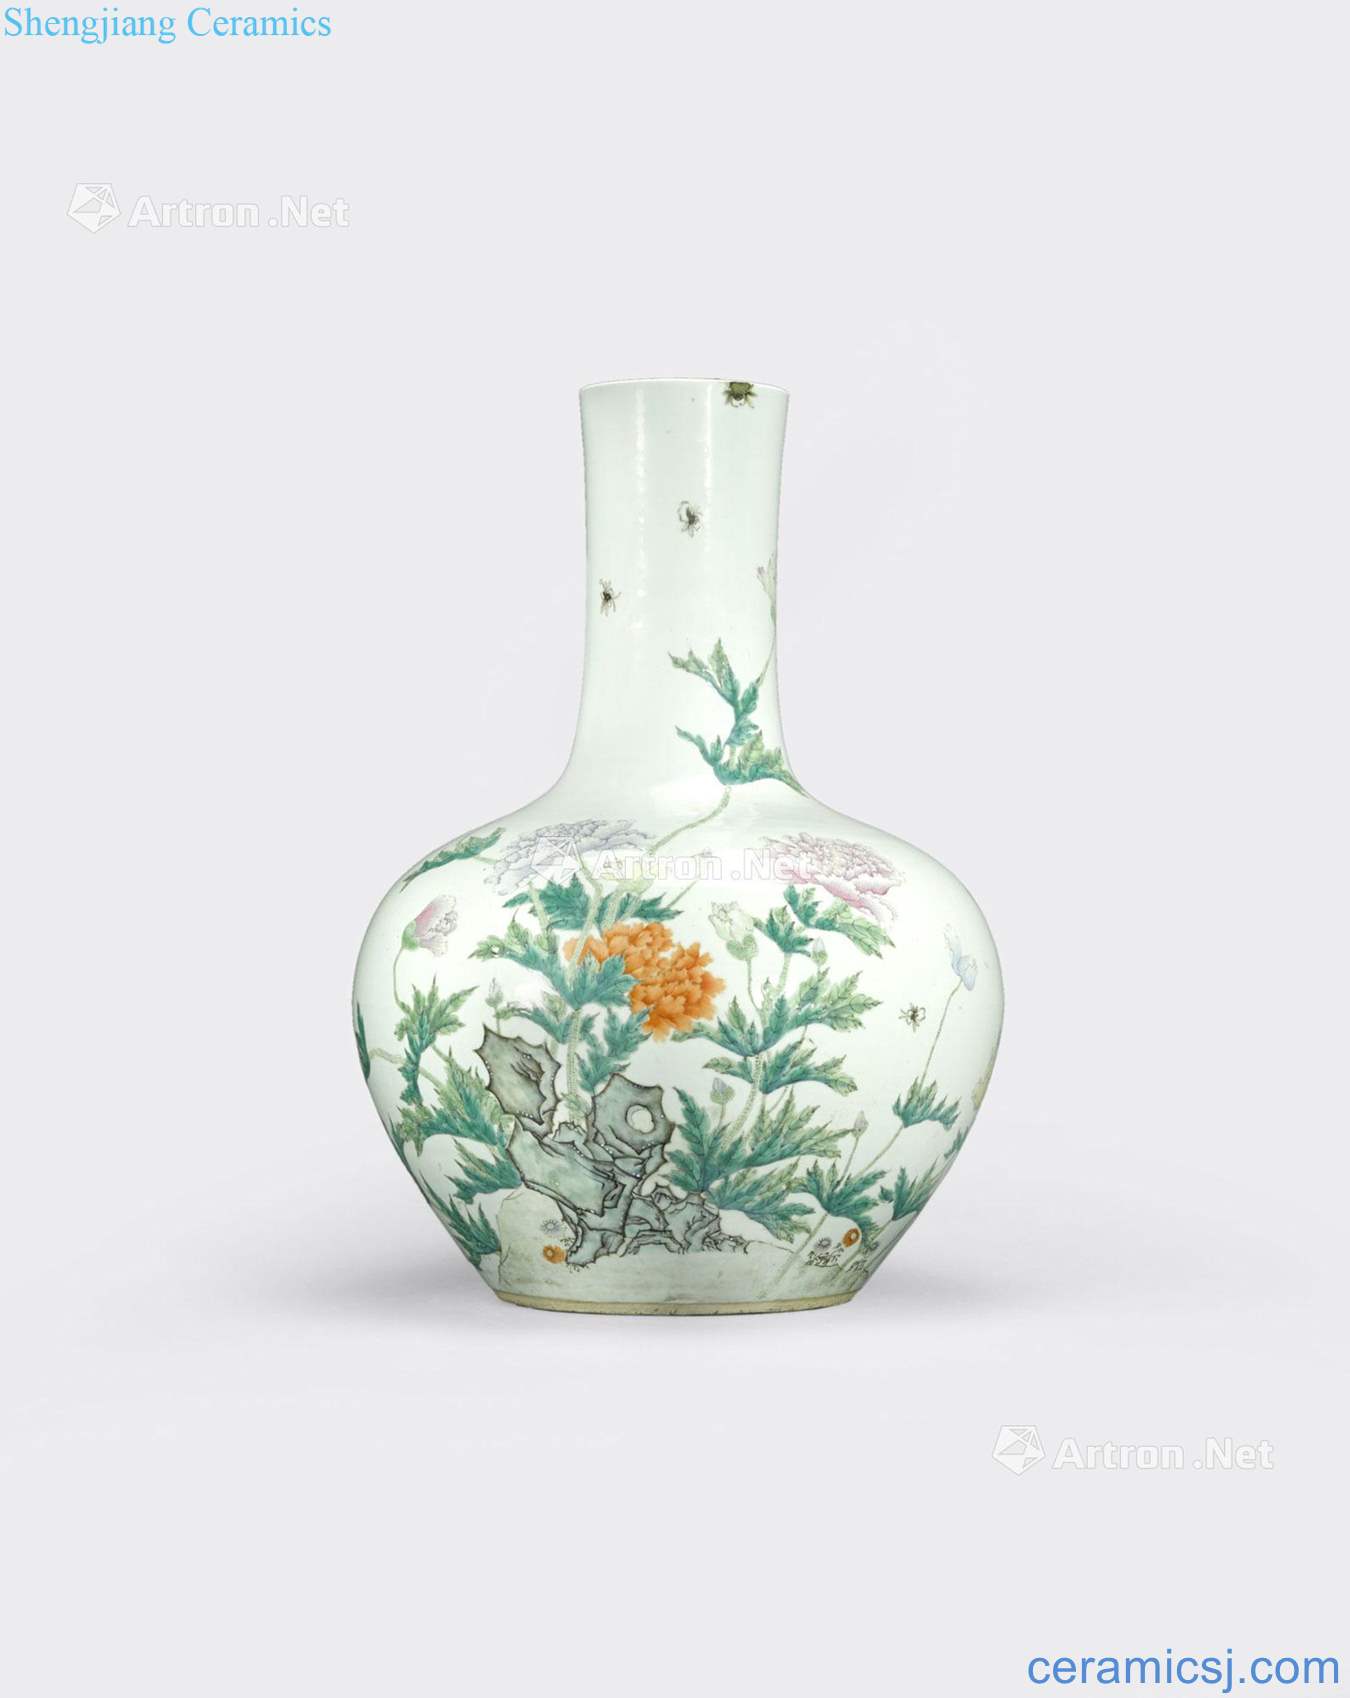 Qianlong mark, newest the Qing/Republic period A LARGE FAMILLE ROSE ENAMELED STICK NECK VASE, TIANQIUPING